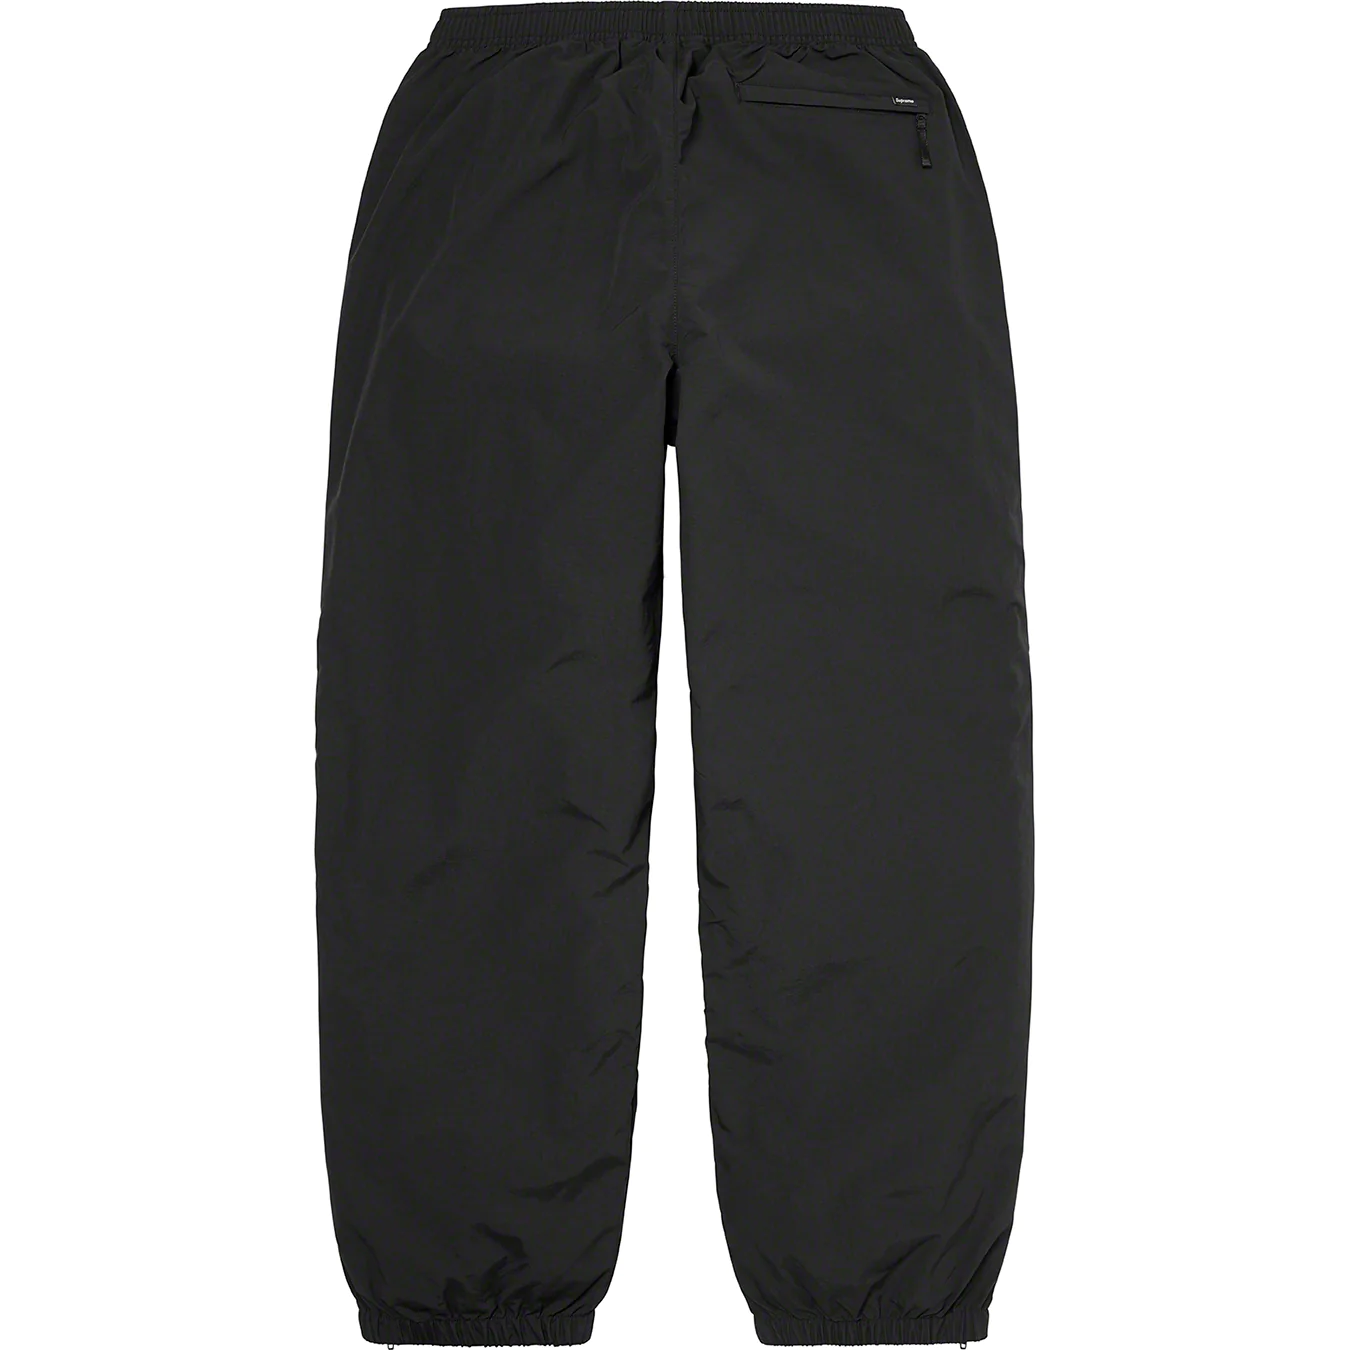 Full Zip Baggy Warm Up Pant | Supreme 23ss